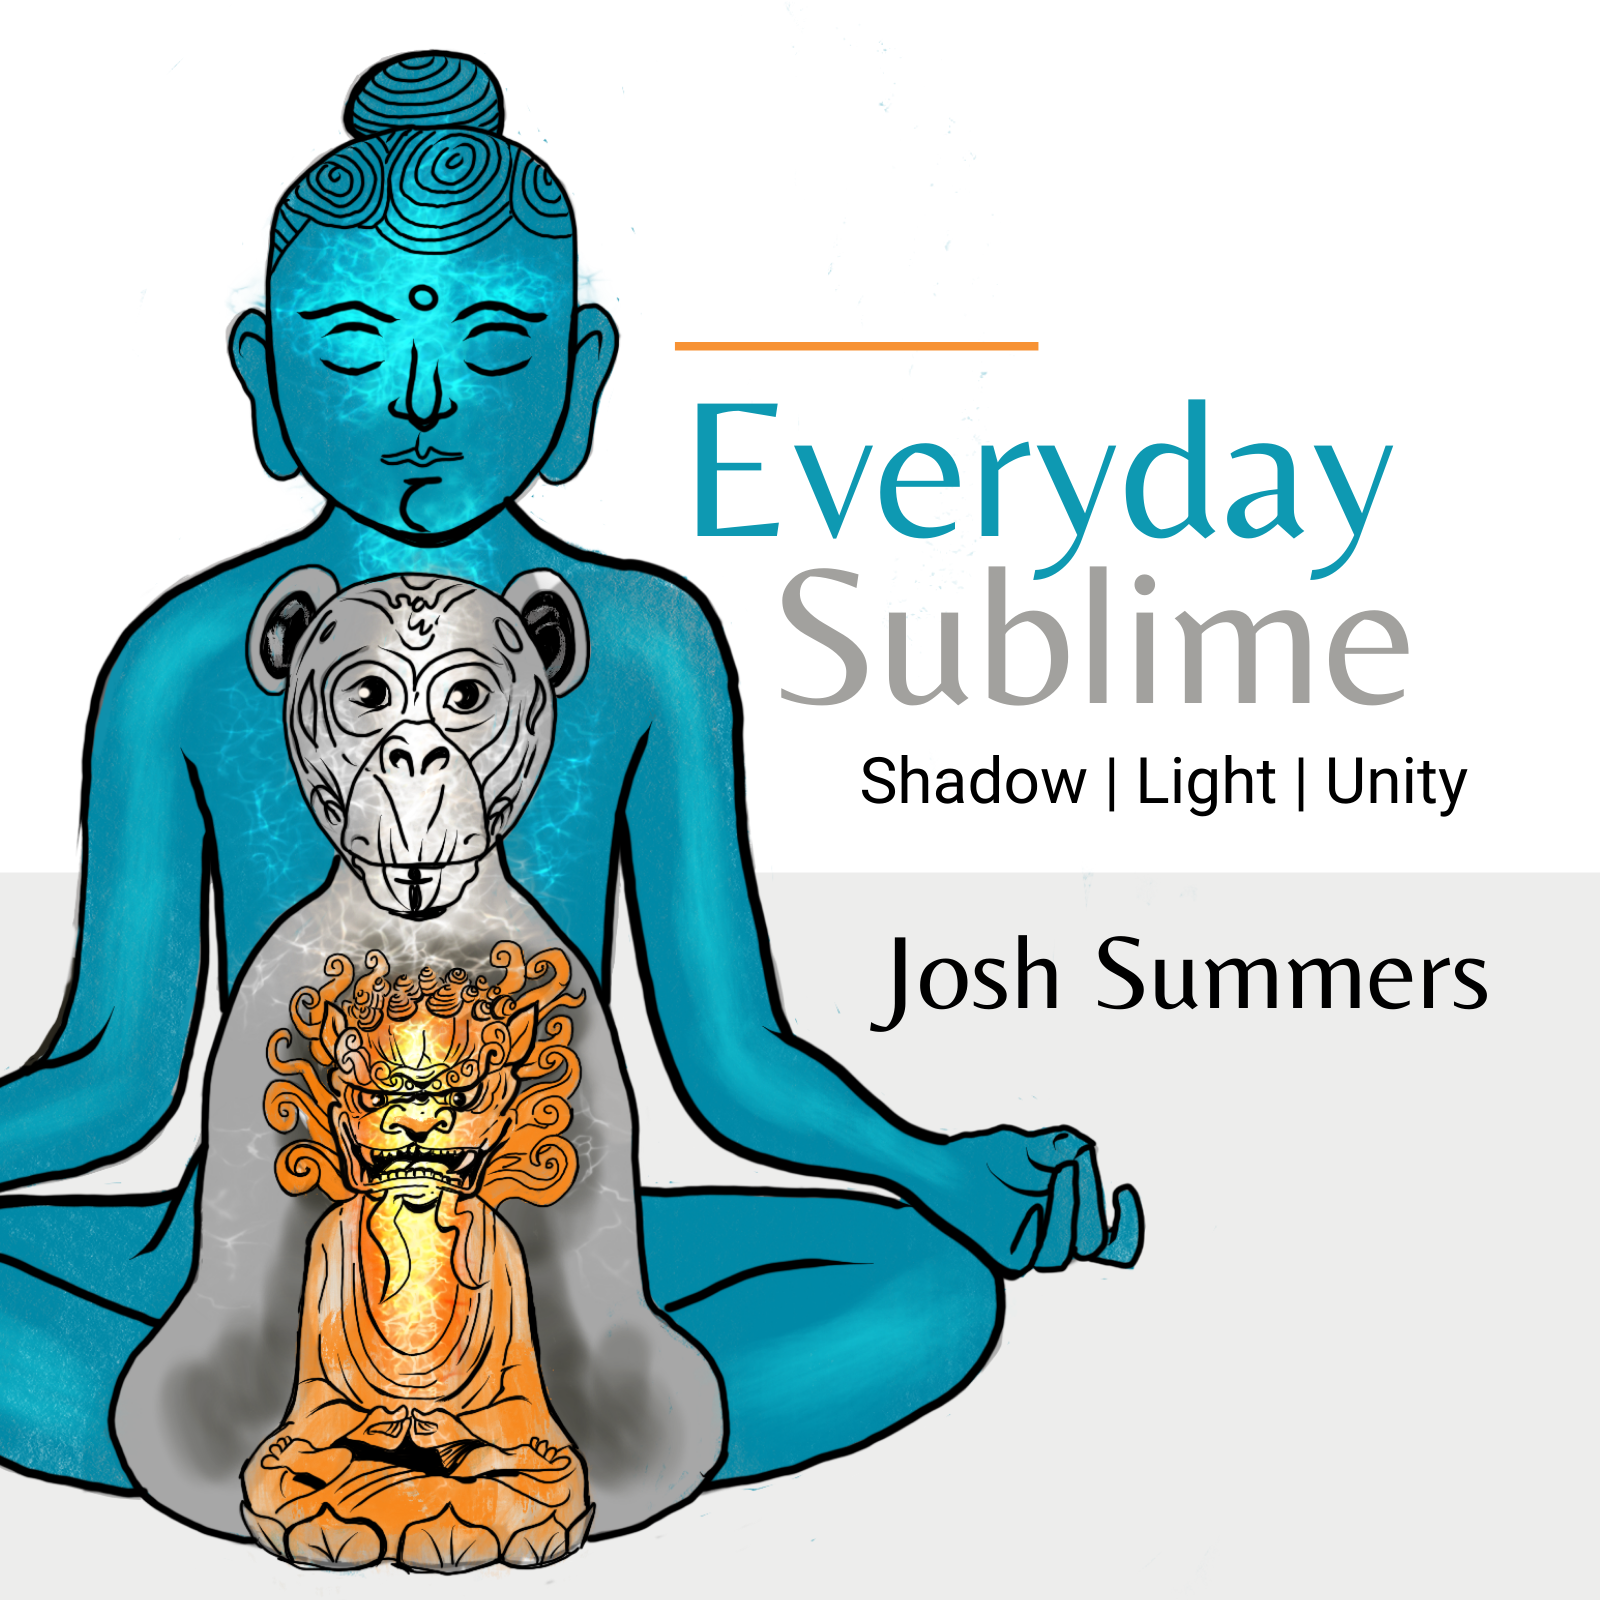 Everyday Sublime Podcast - Hosted by Josh Summers